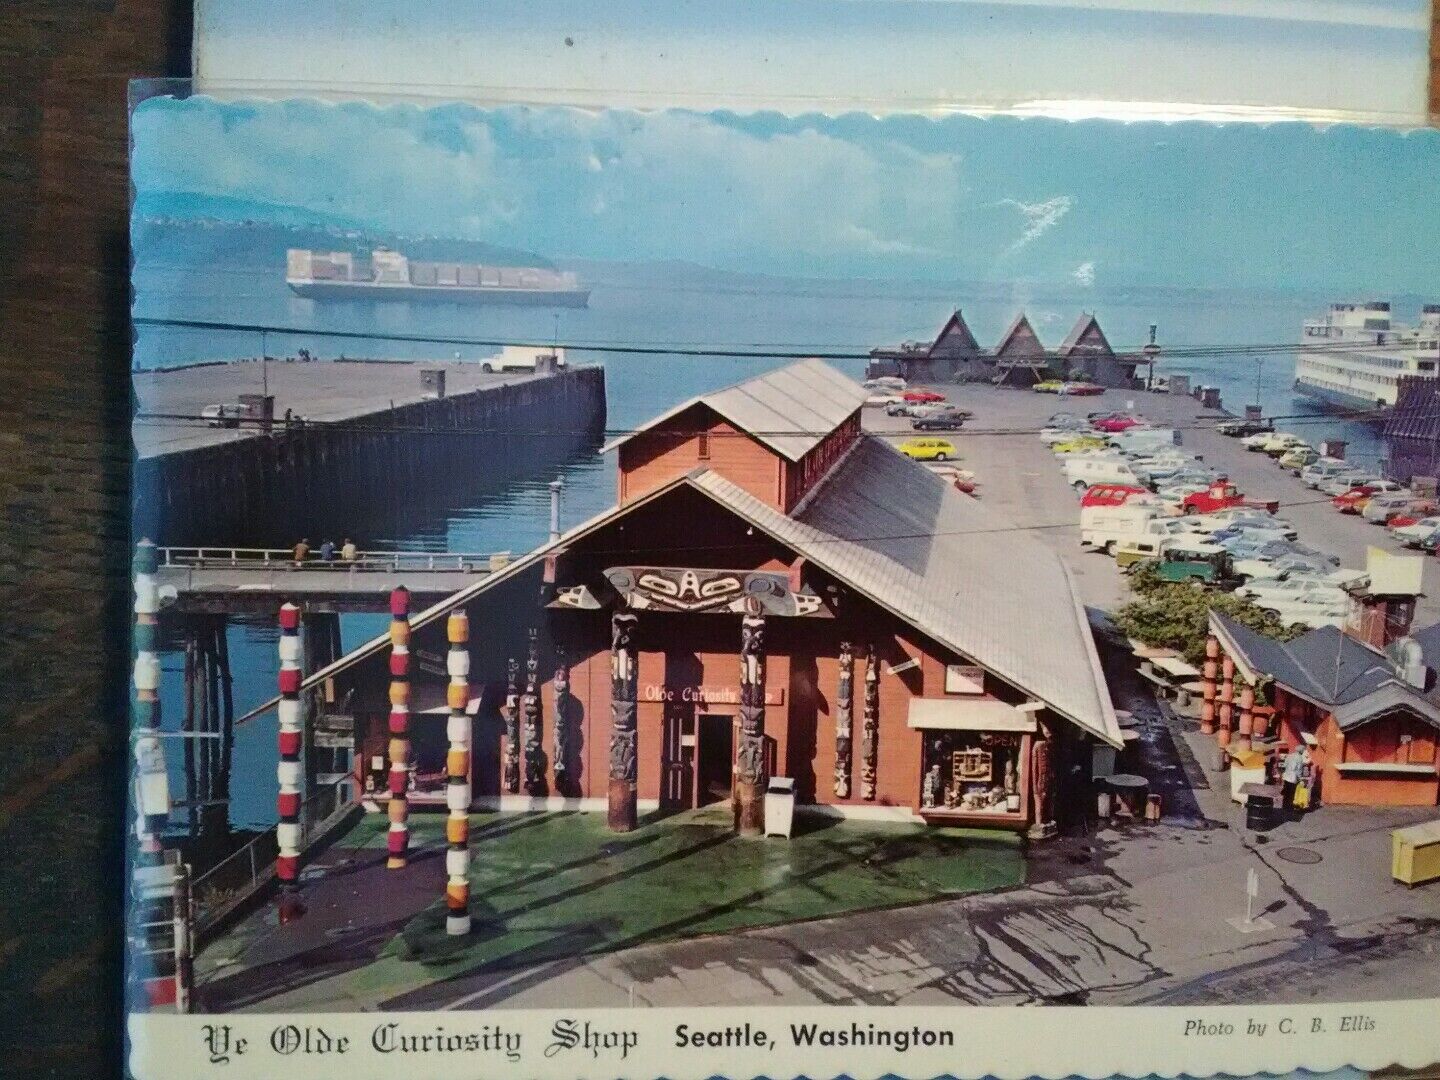 VINTAGE POST CARD AERIAL VIEW OVER YE OLD'E CURIOSITY SHOP  SEATTLE WASHINGTON